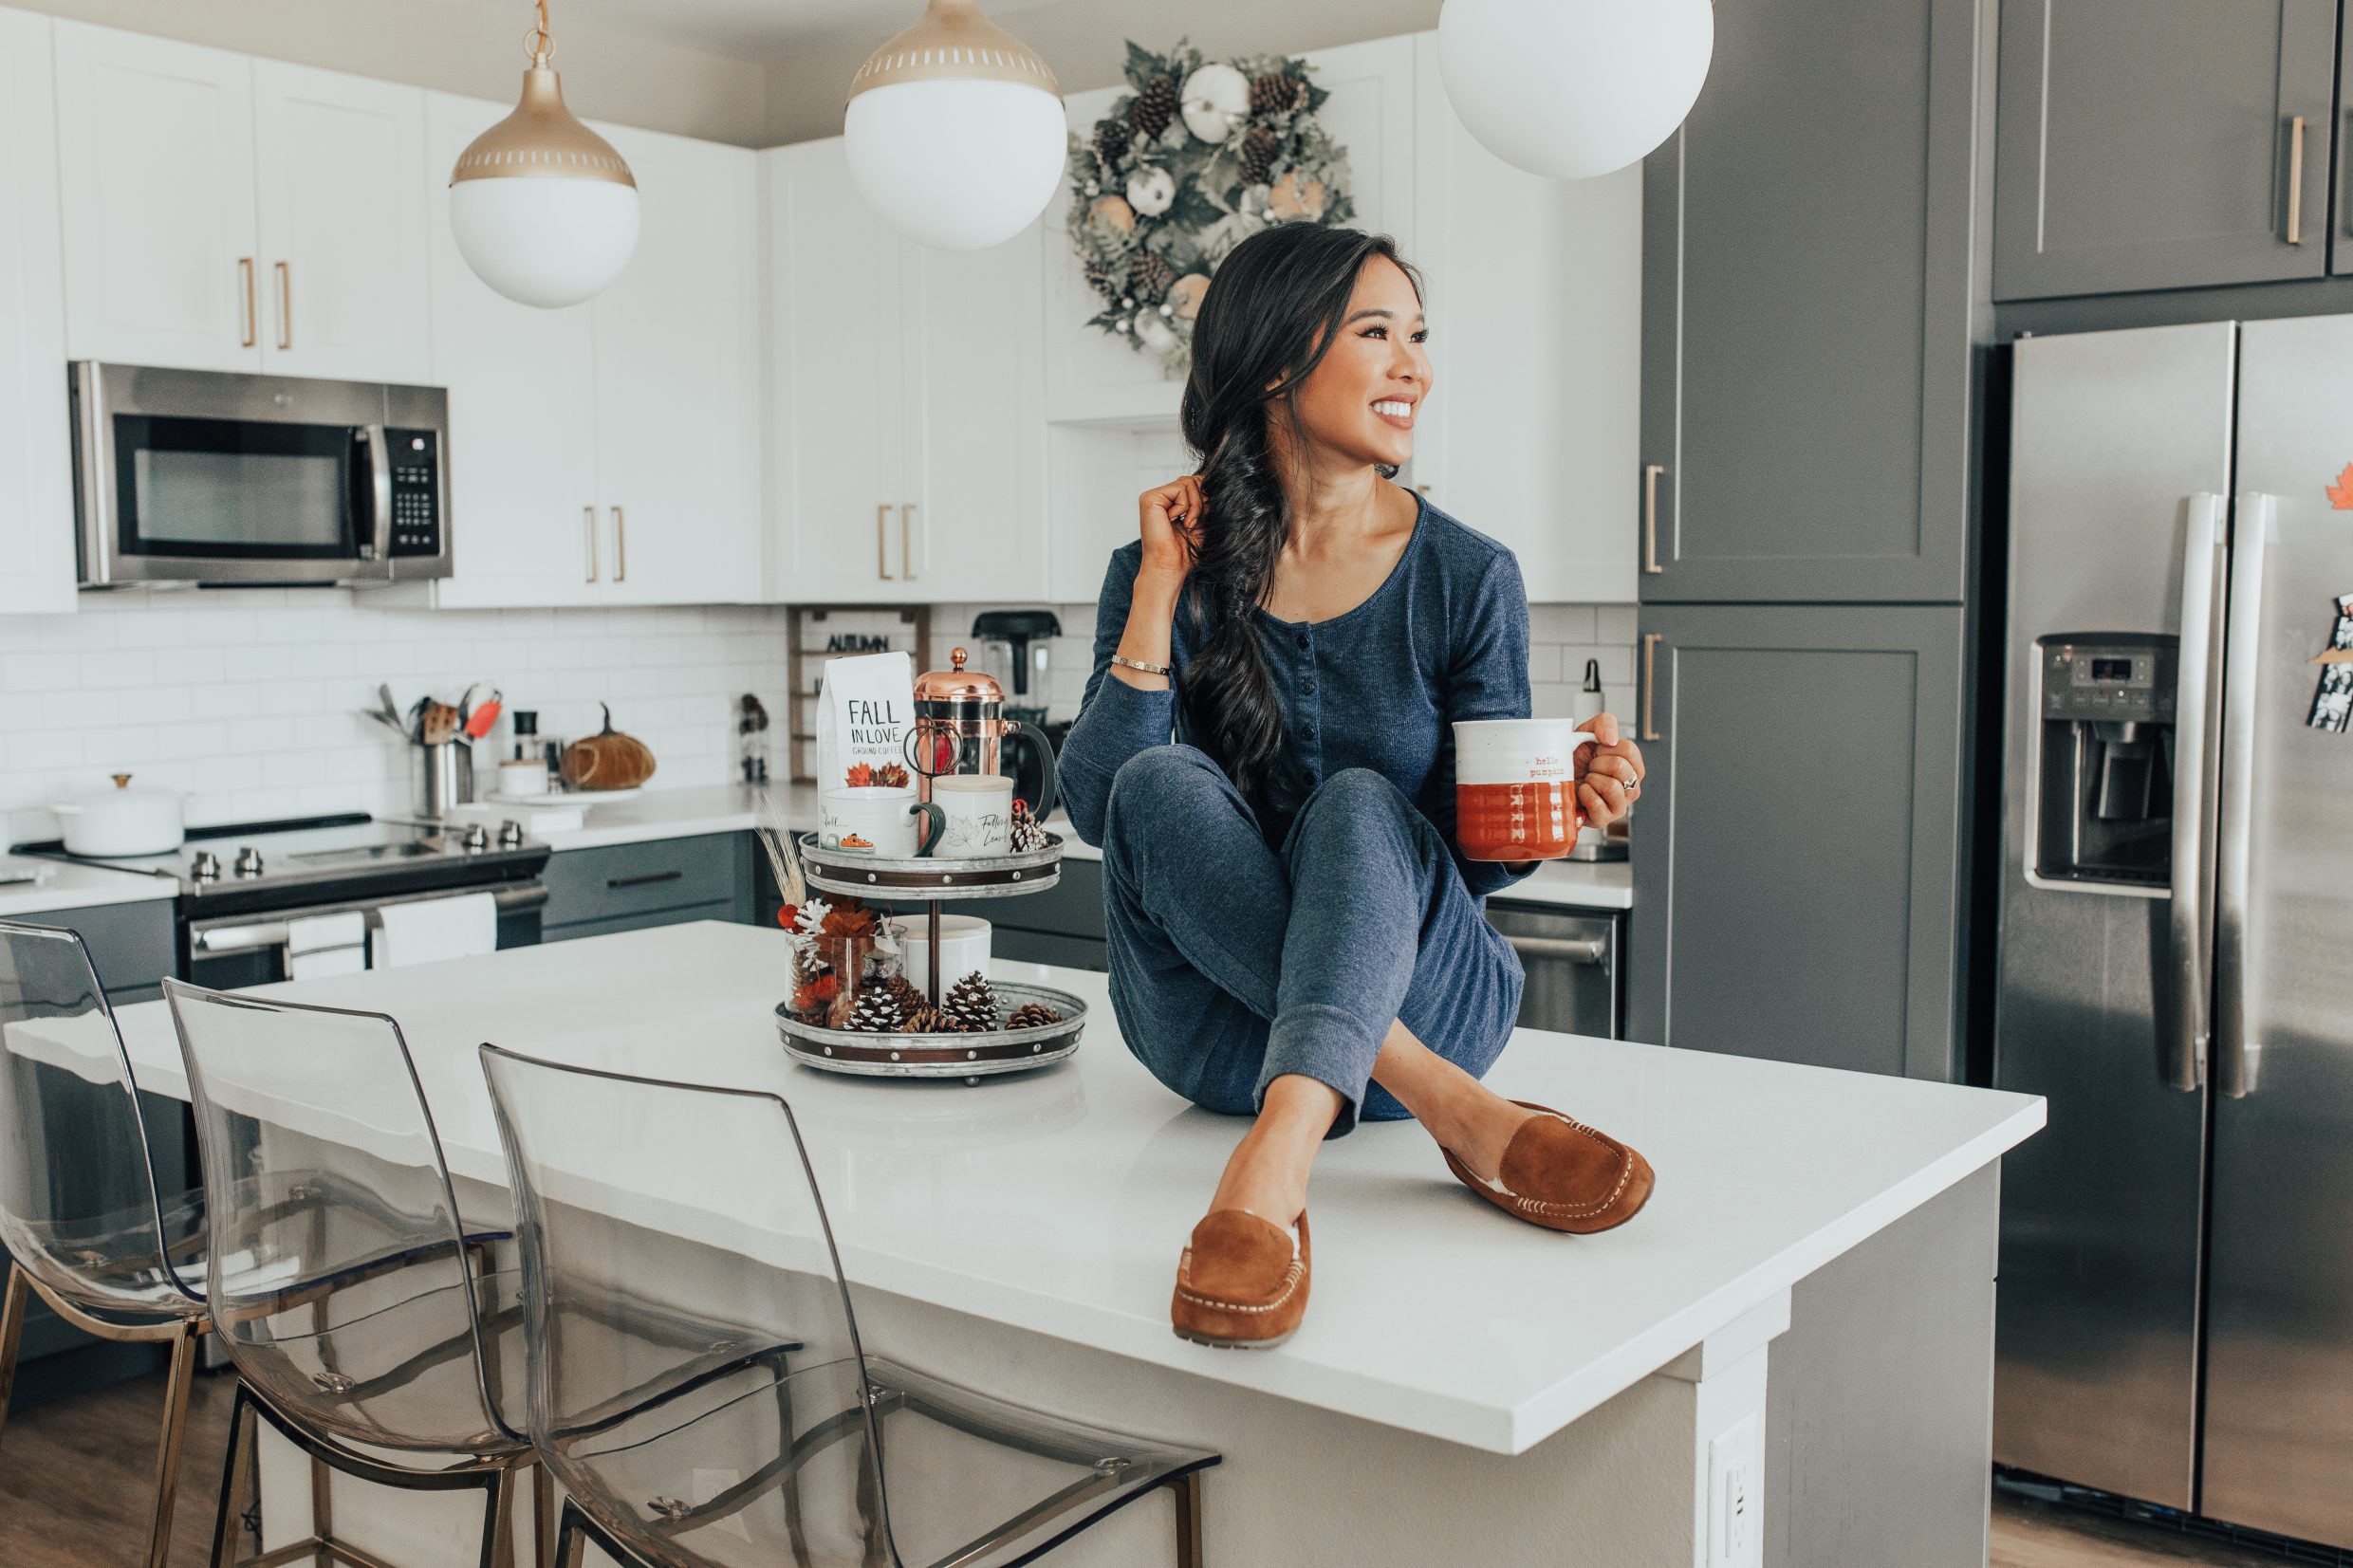 Comfy fall outfit for relaxing at home with blogger Hoang-Kim in her Dallas apartment with two toned cabinets and fall decor